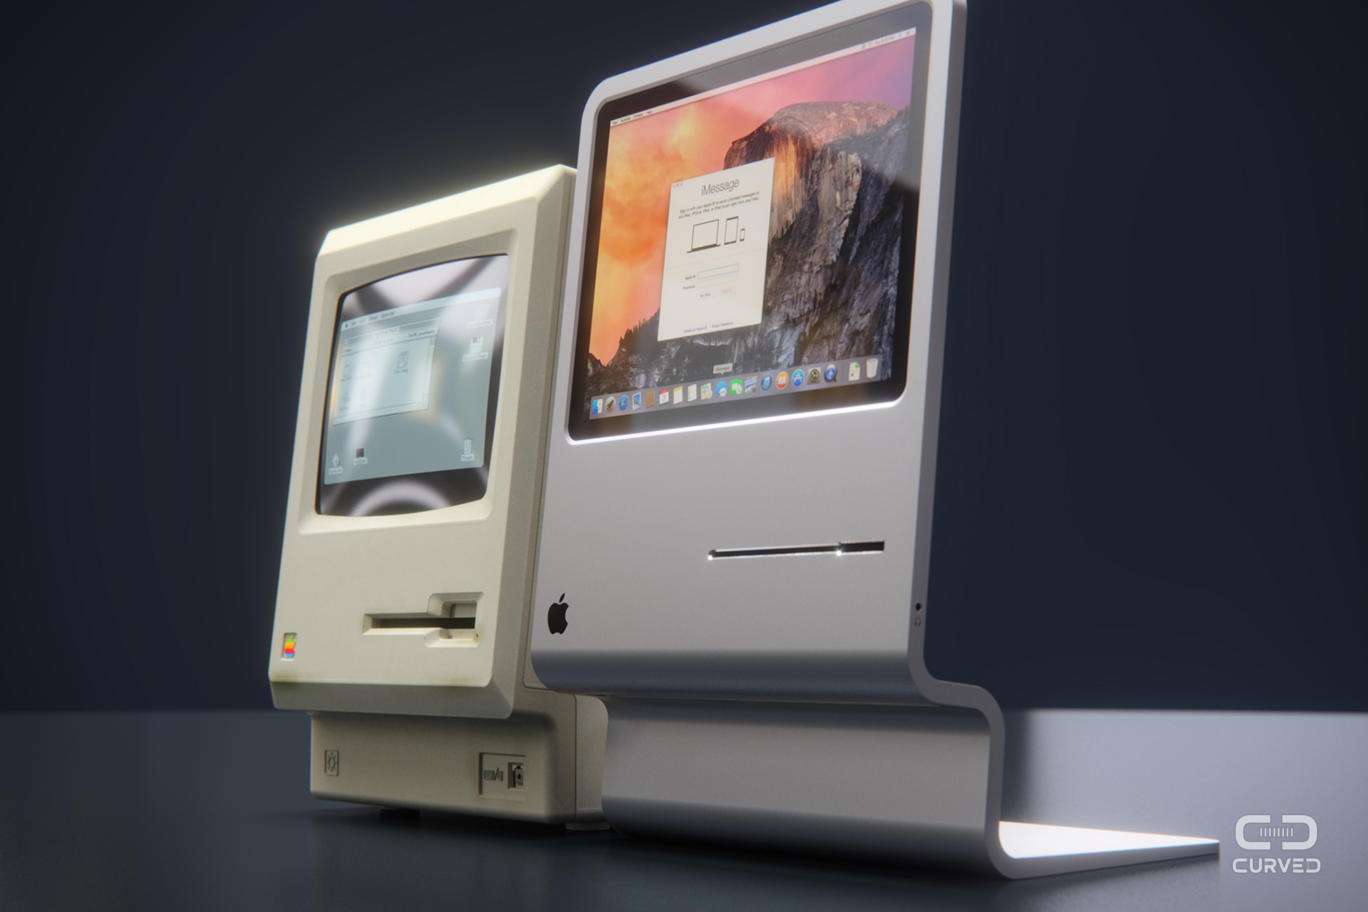 Mac 2015 concept design by Curved/labs